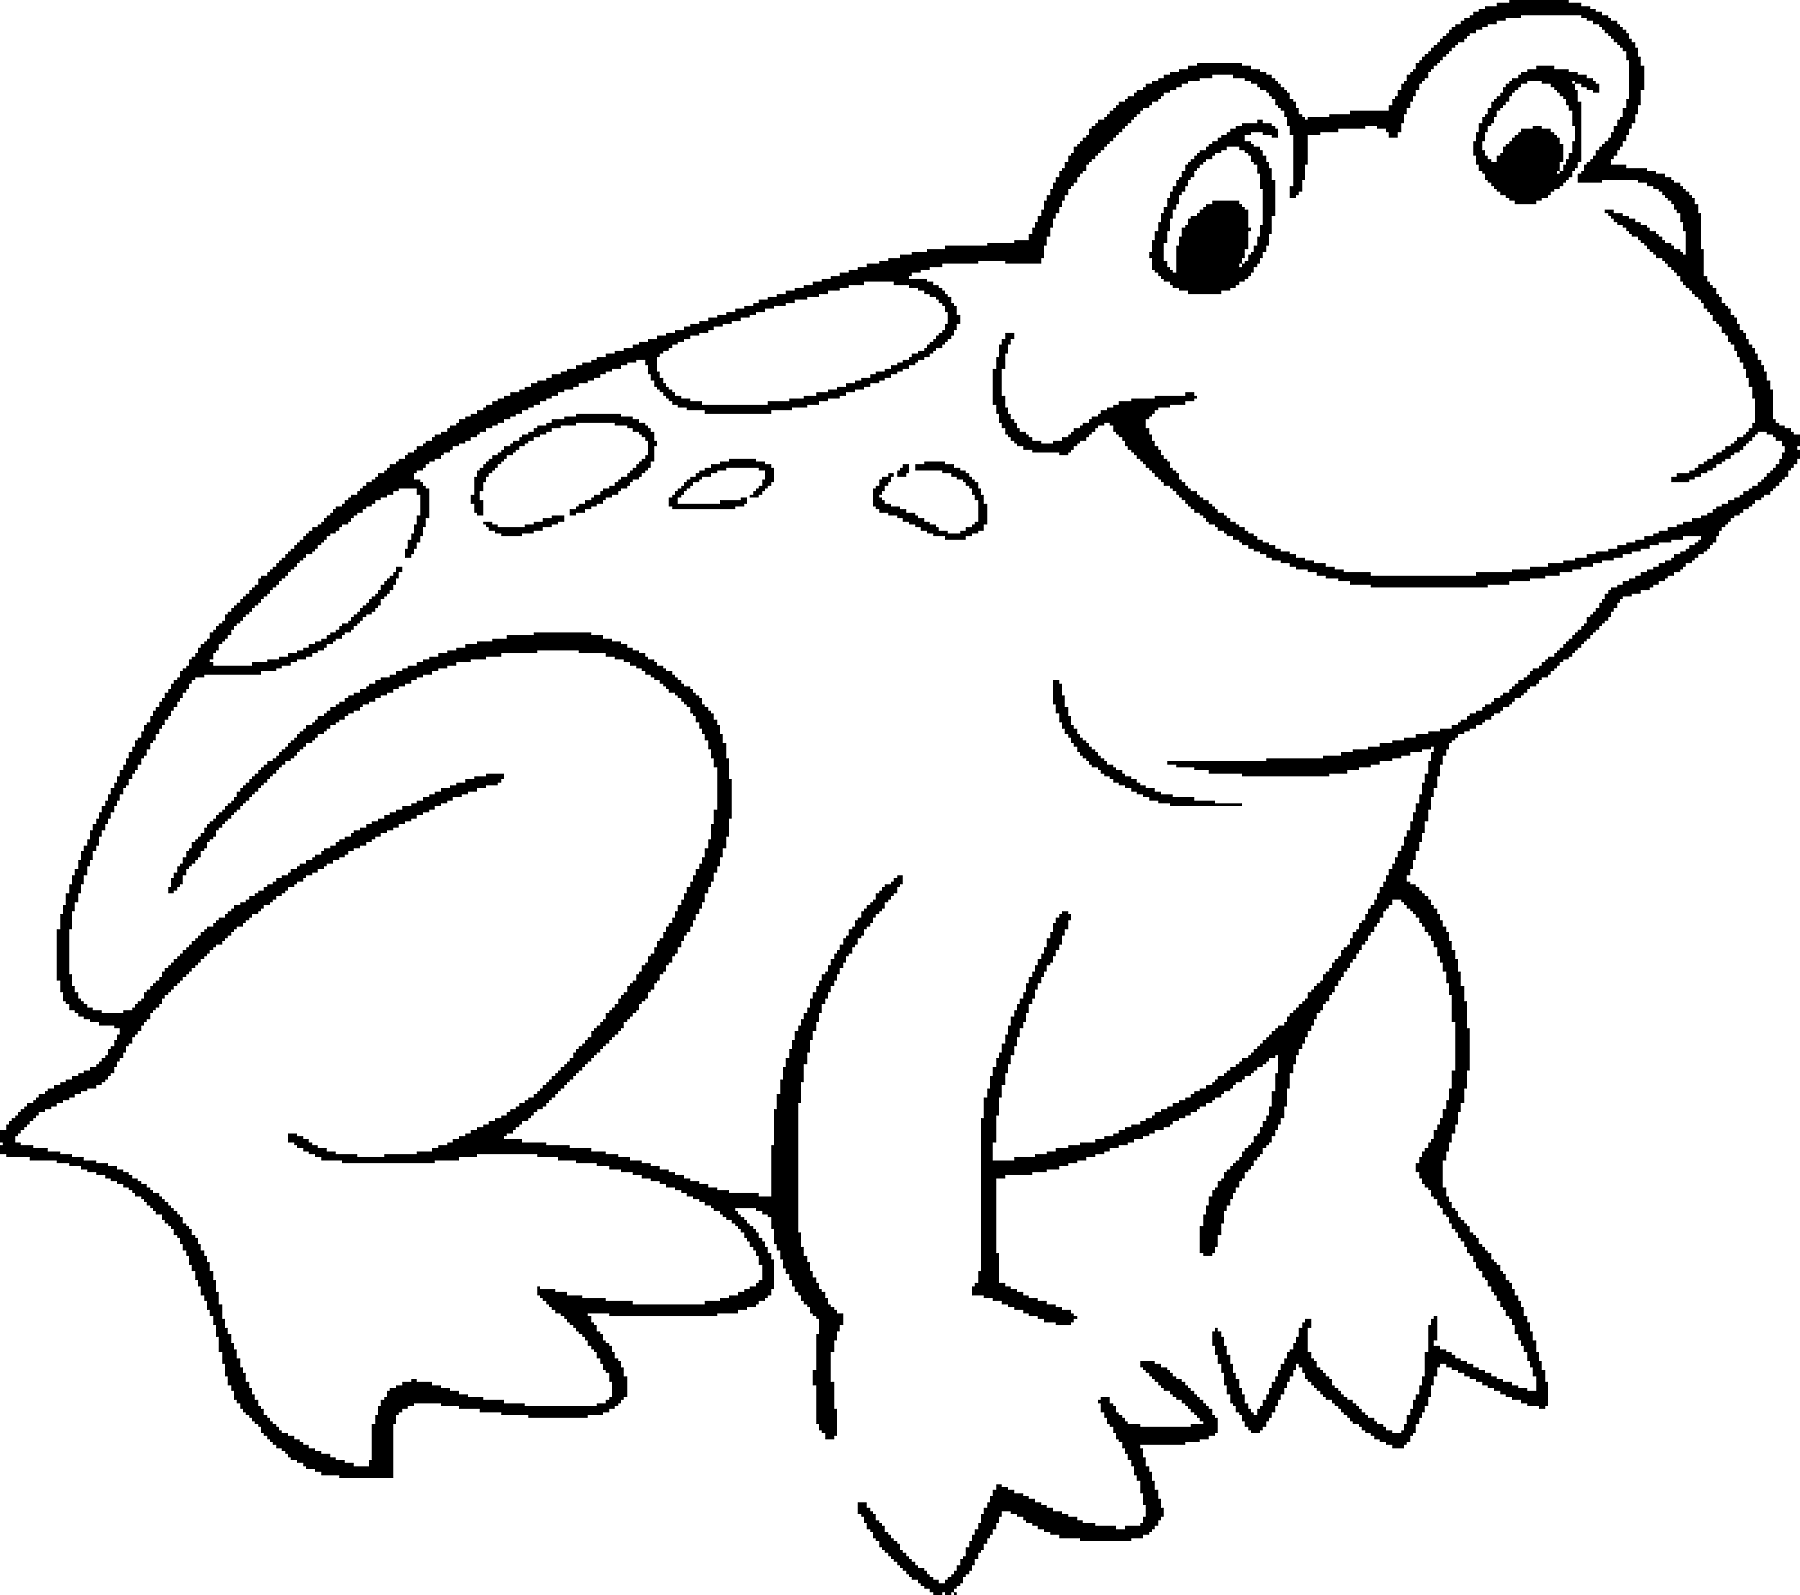 Frog silhouette clip art. Dow